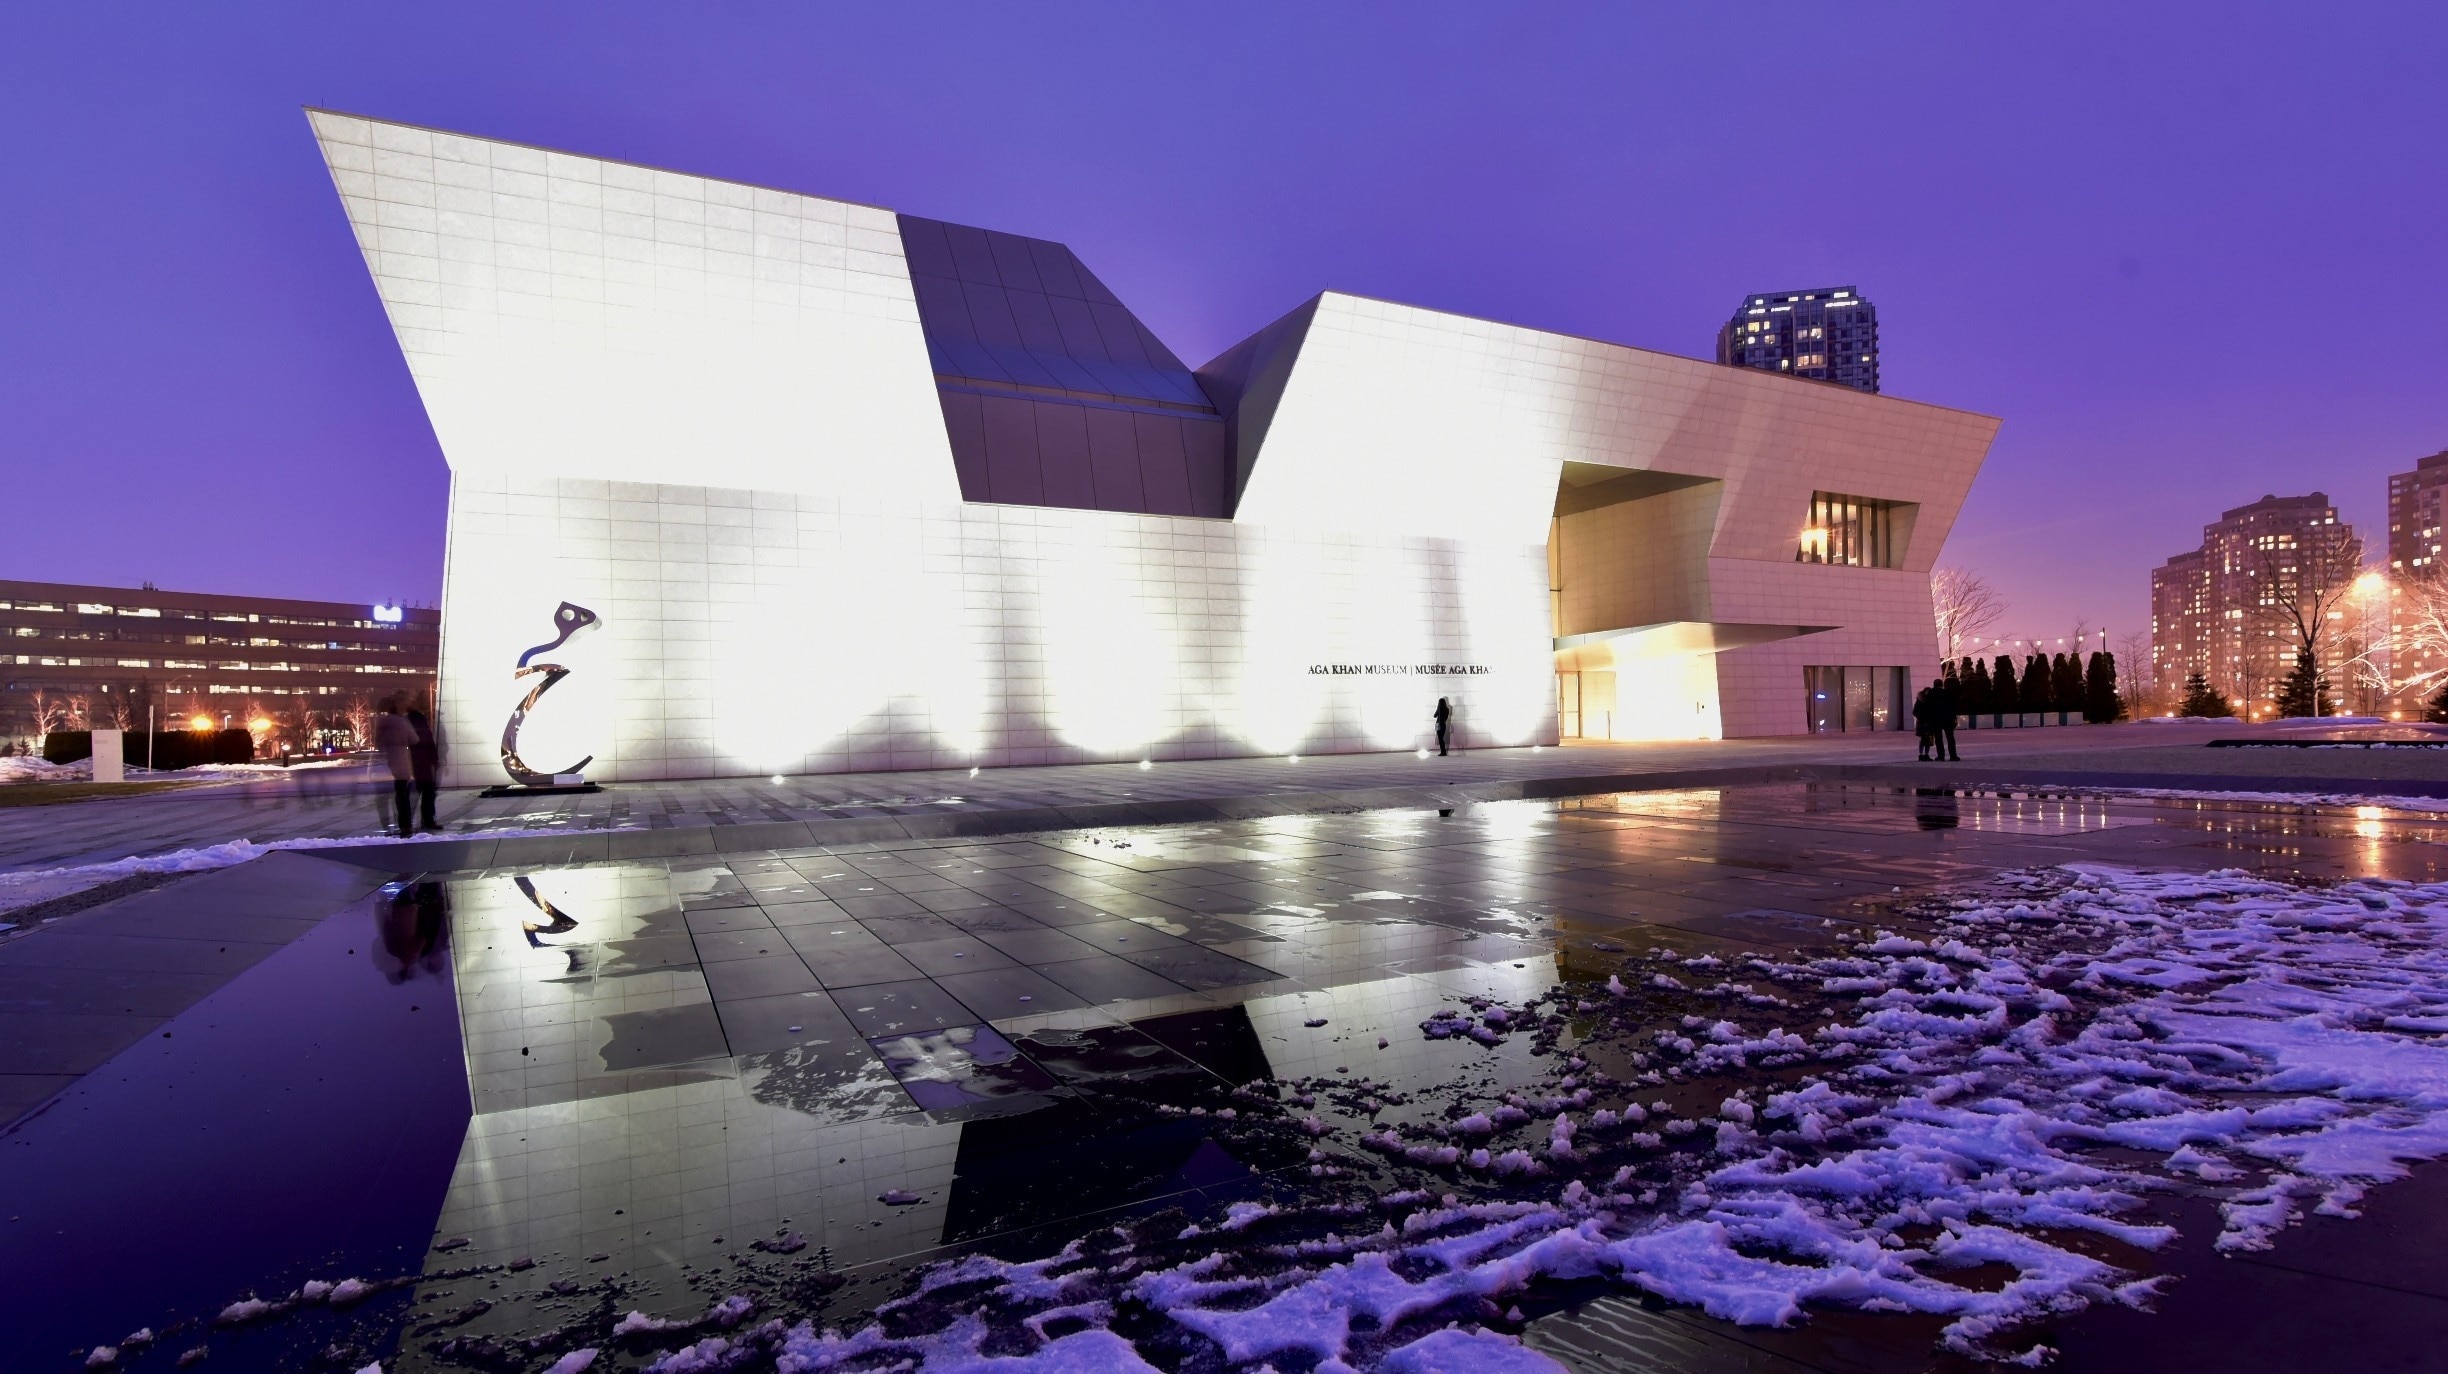 The Aga Khan Museum is the first and only museum dedicate to Islamic Art and Culture in North and South America. The museum is an initiative of the Aga Khan Trust for Culture, an agency of the Aga Khan Development Network. (Wikipedia)
Tip: Free on every Wednesday from 4-8 pm.
#Canada #Toronto #Reflections #Ontario #architecture #winter #museum #Islam #TroverTips 